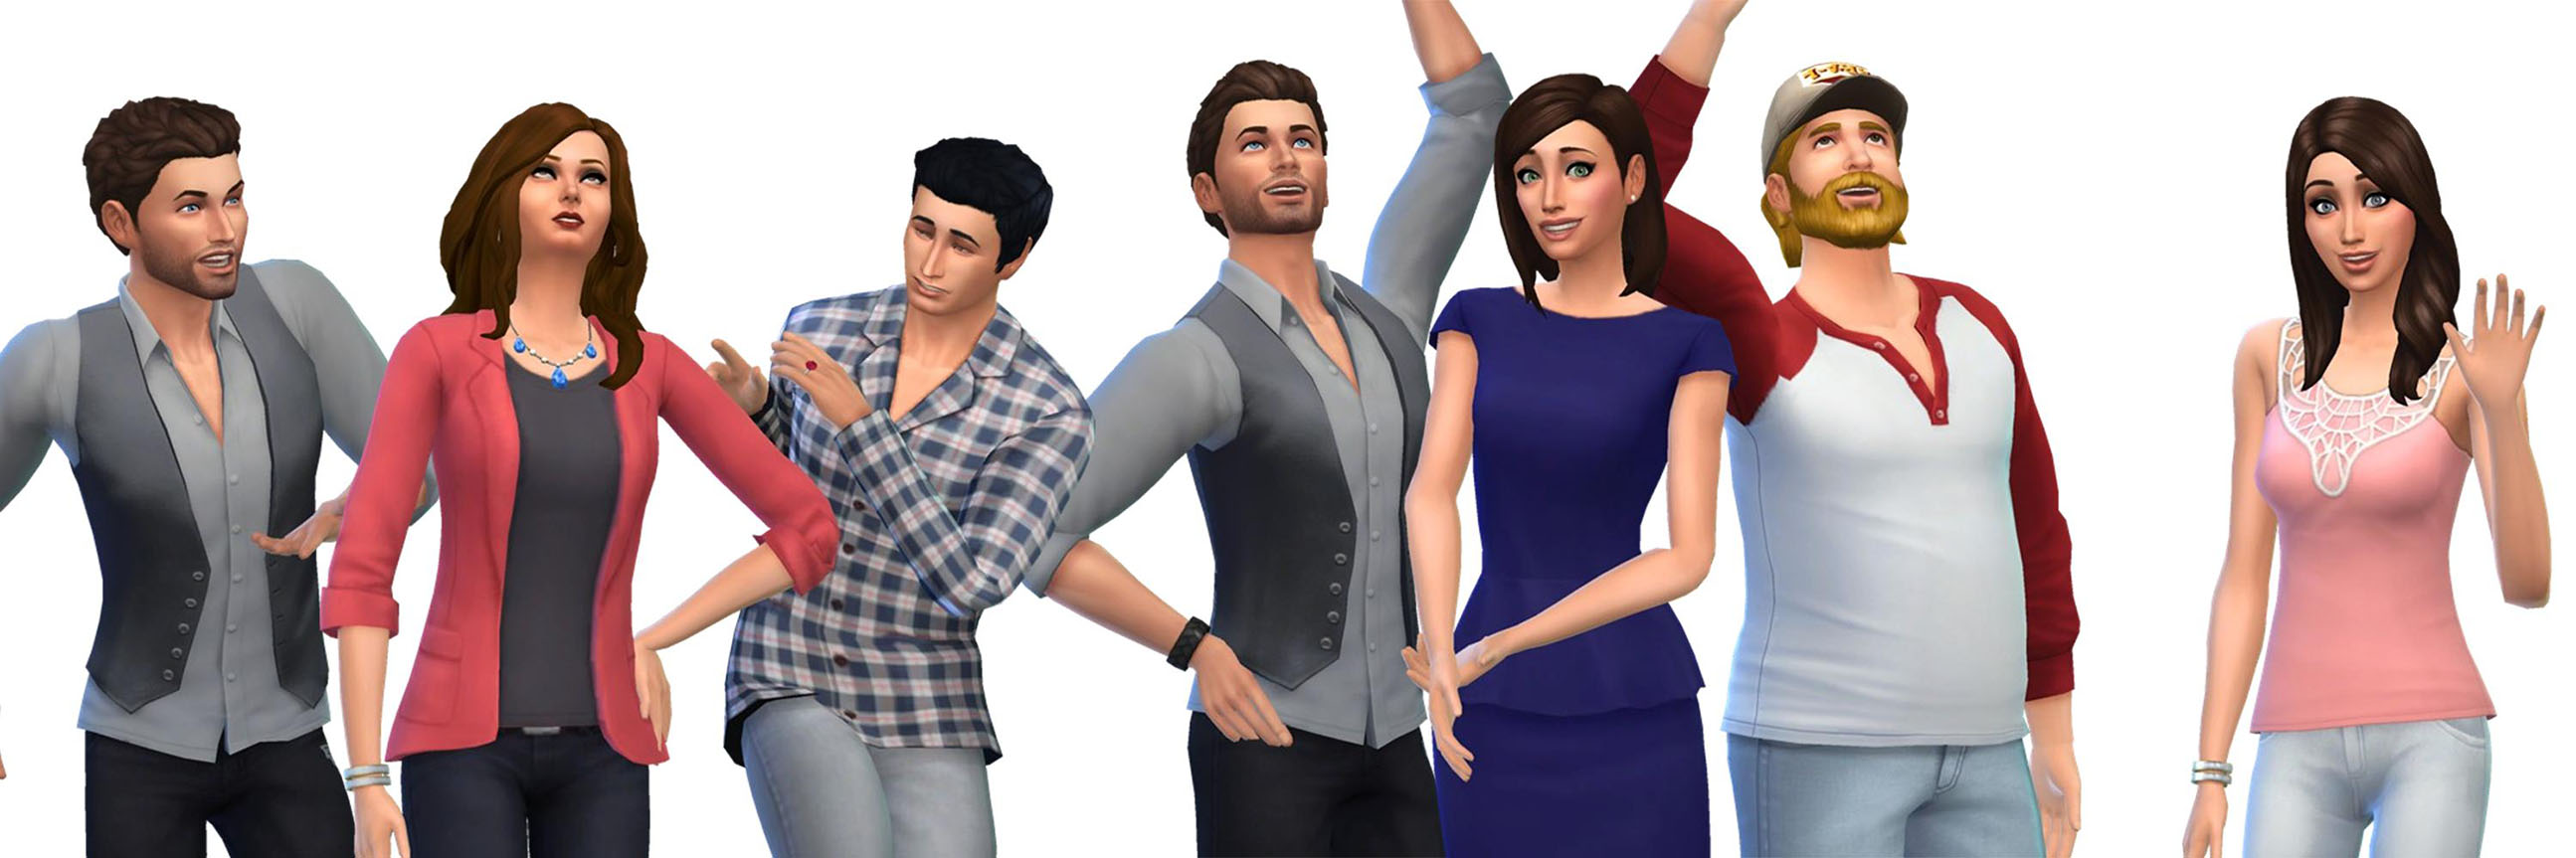 the sims 4 pose player mod